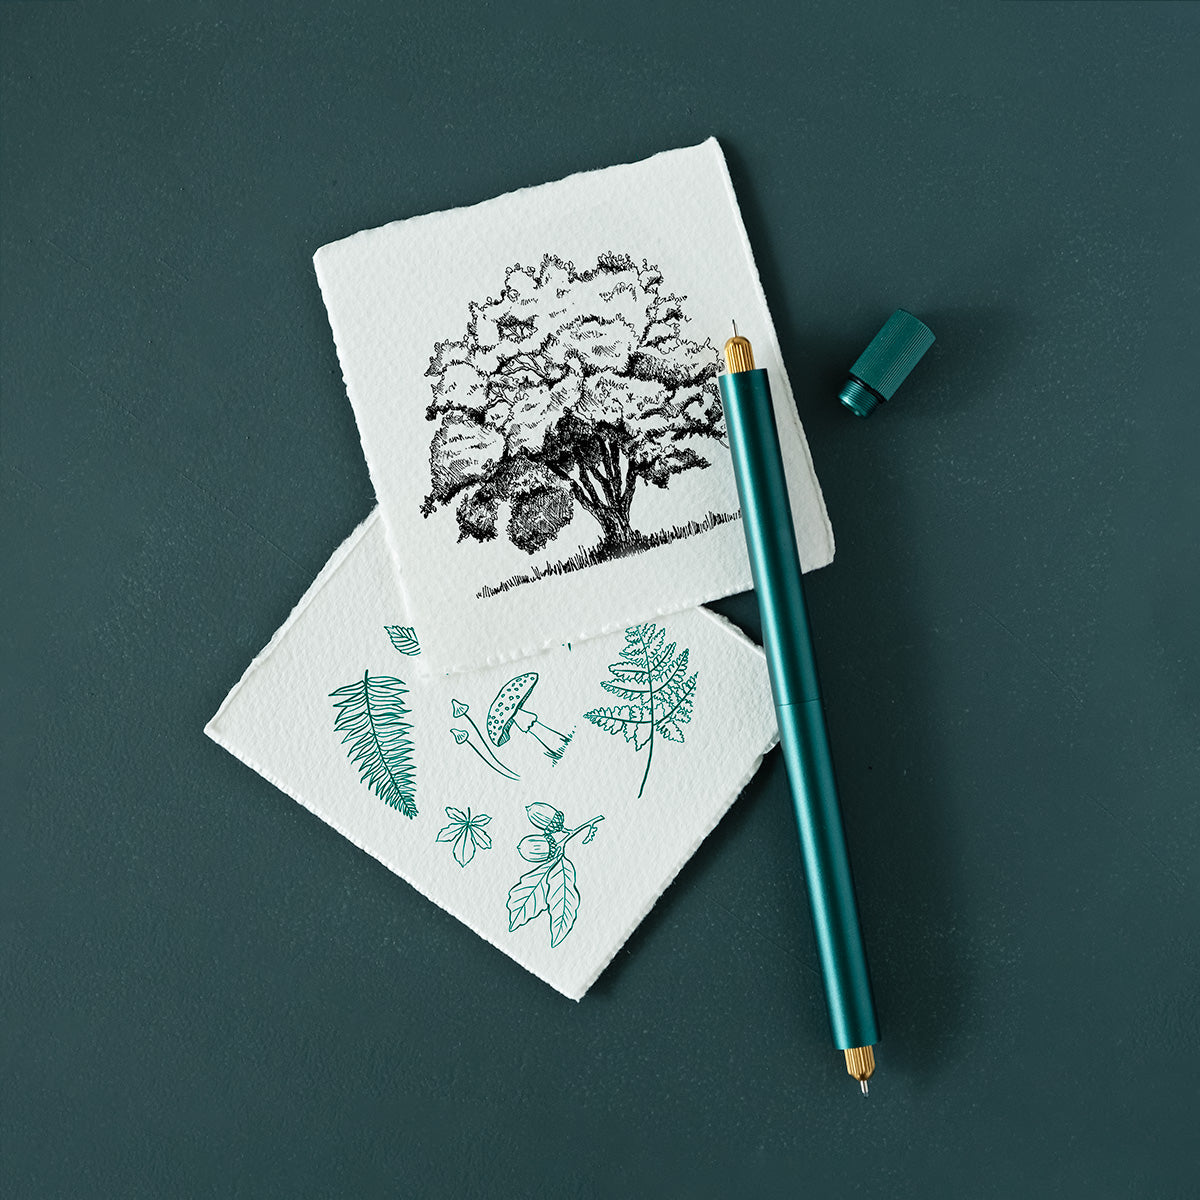 the lumos duo refillable fineliner in ivy with some botanical illustrations